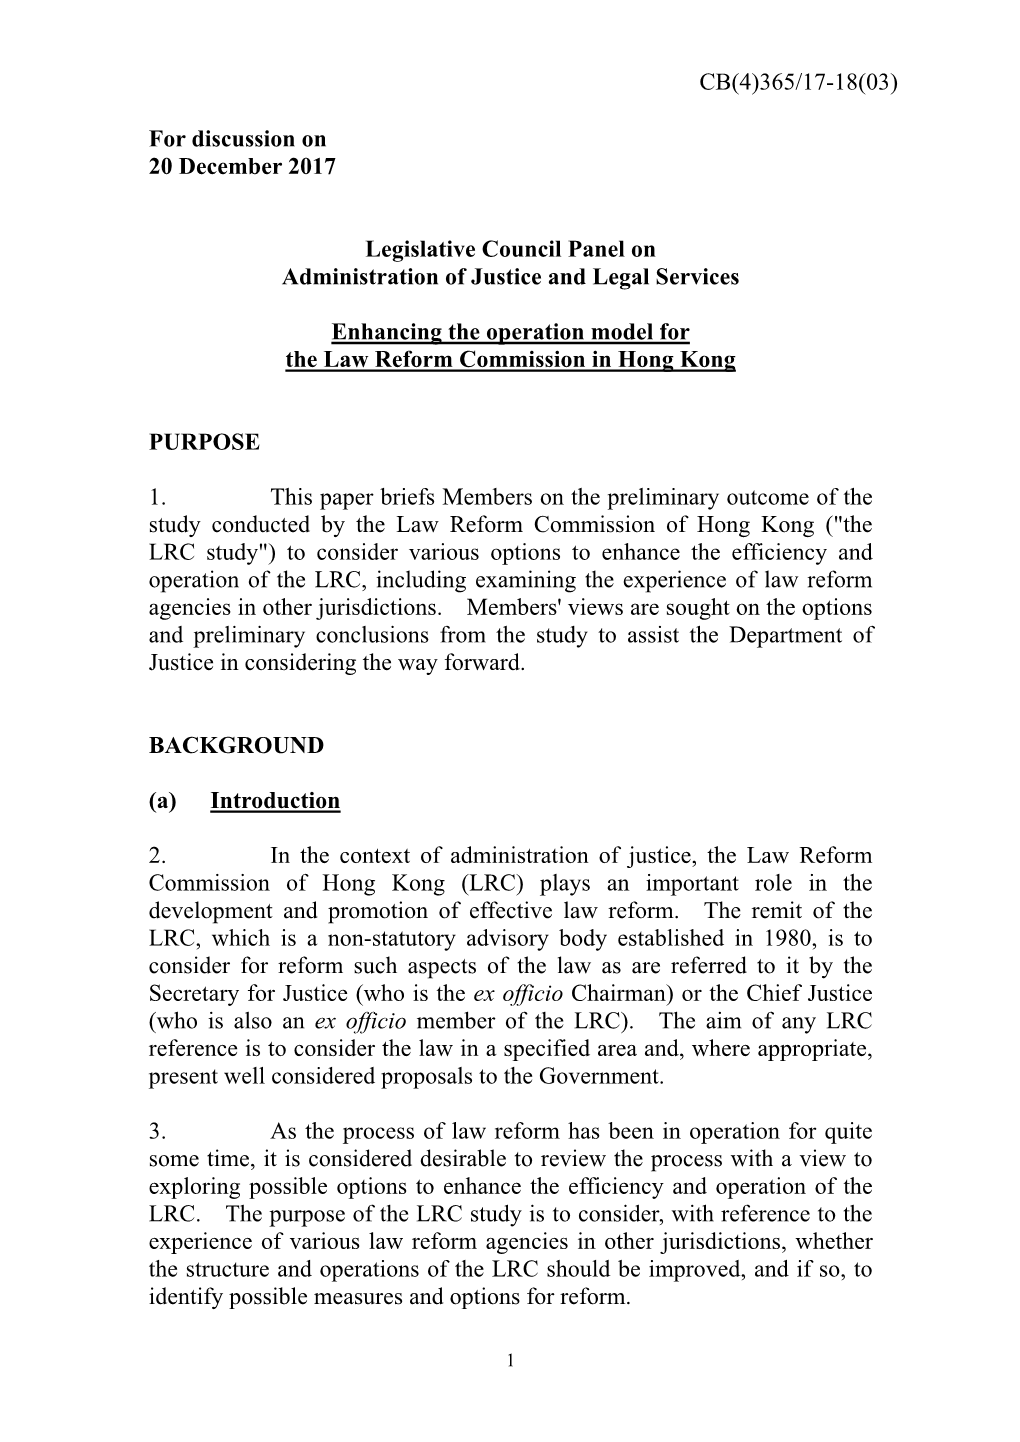 Administration's Paper for the Legislative Council Panel On